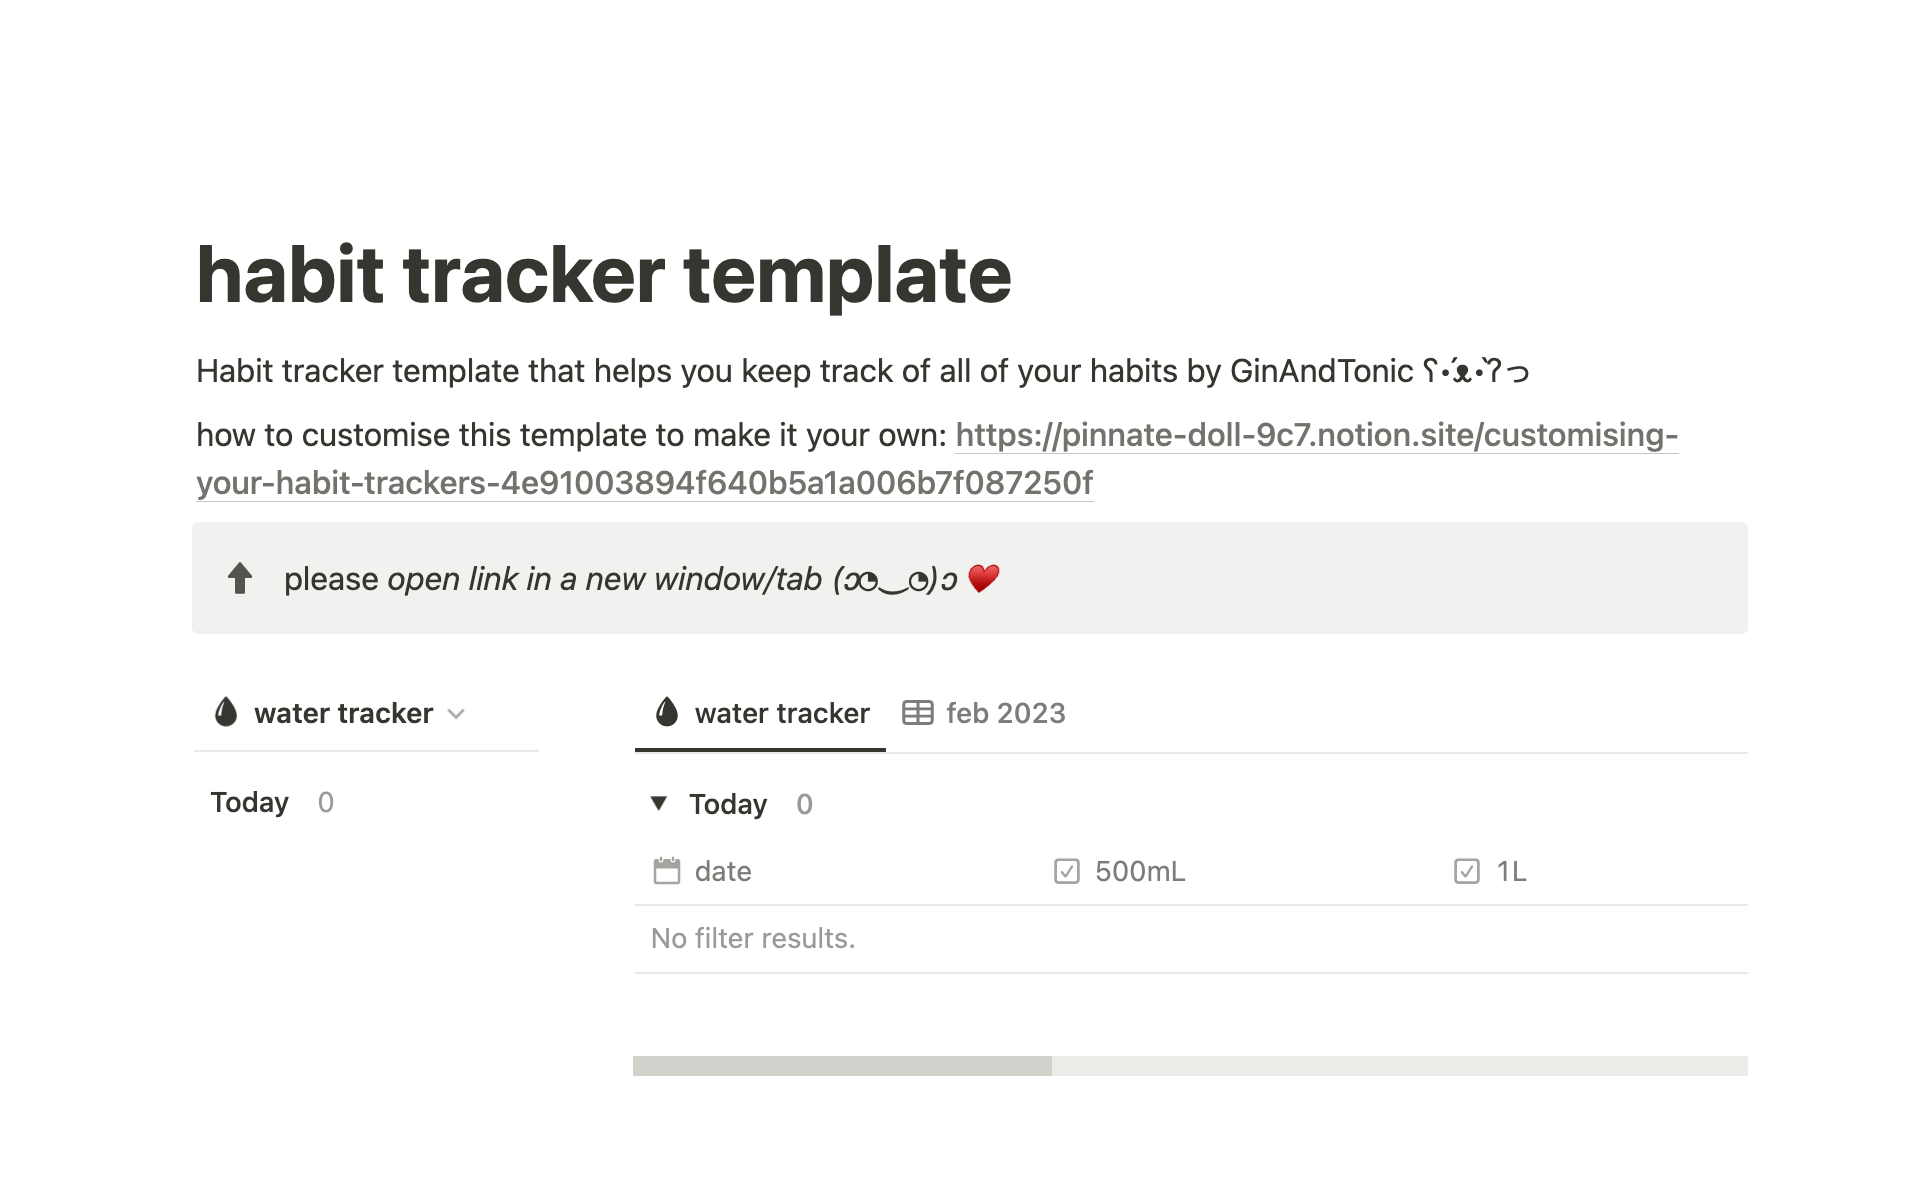 5 pre-made trackers to track your habits.